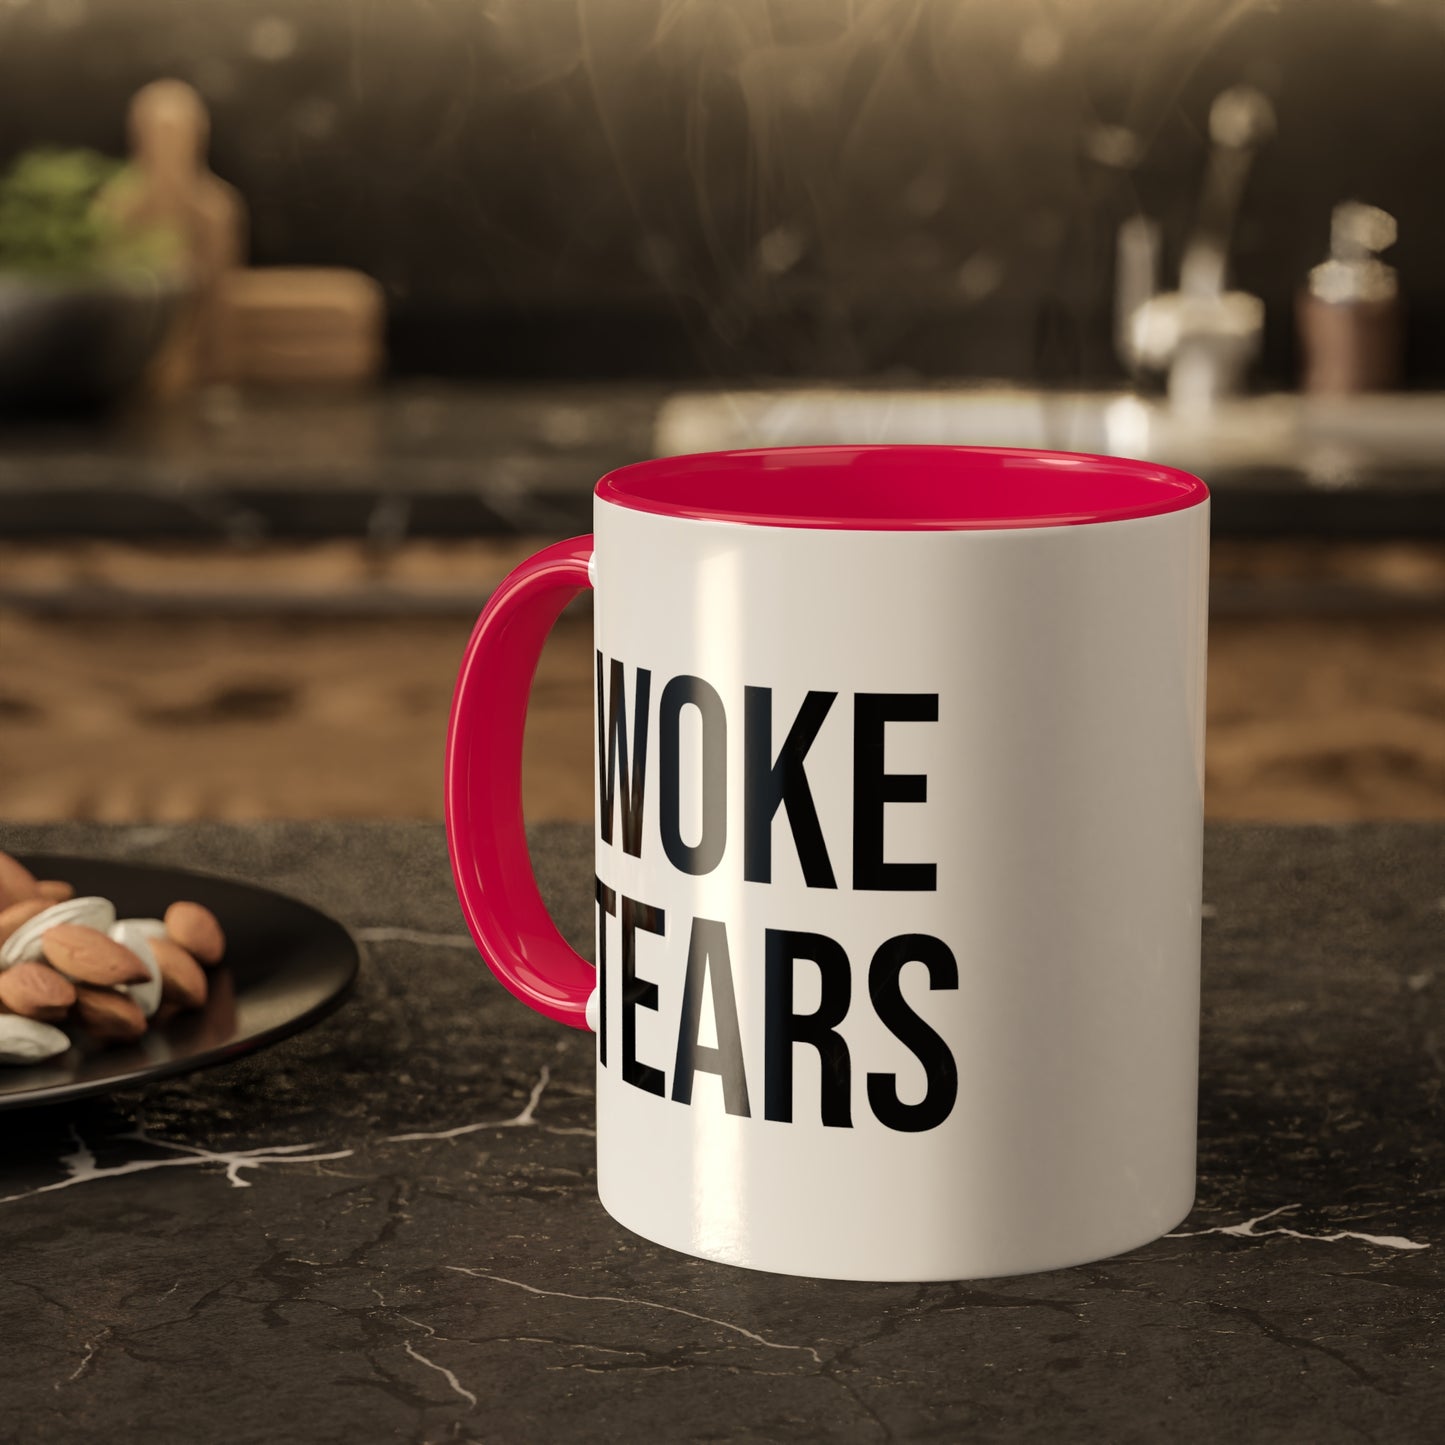 Woke Tears Coffee Mug, Funny Political Commentary Cup, Sarcastic Humor, Gift for Friend, Unique Office Mug, Conversation Starter - News For Reasonable People